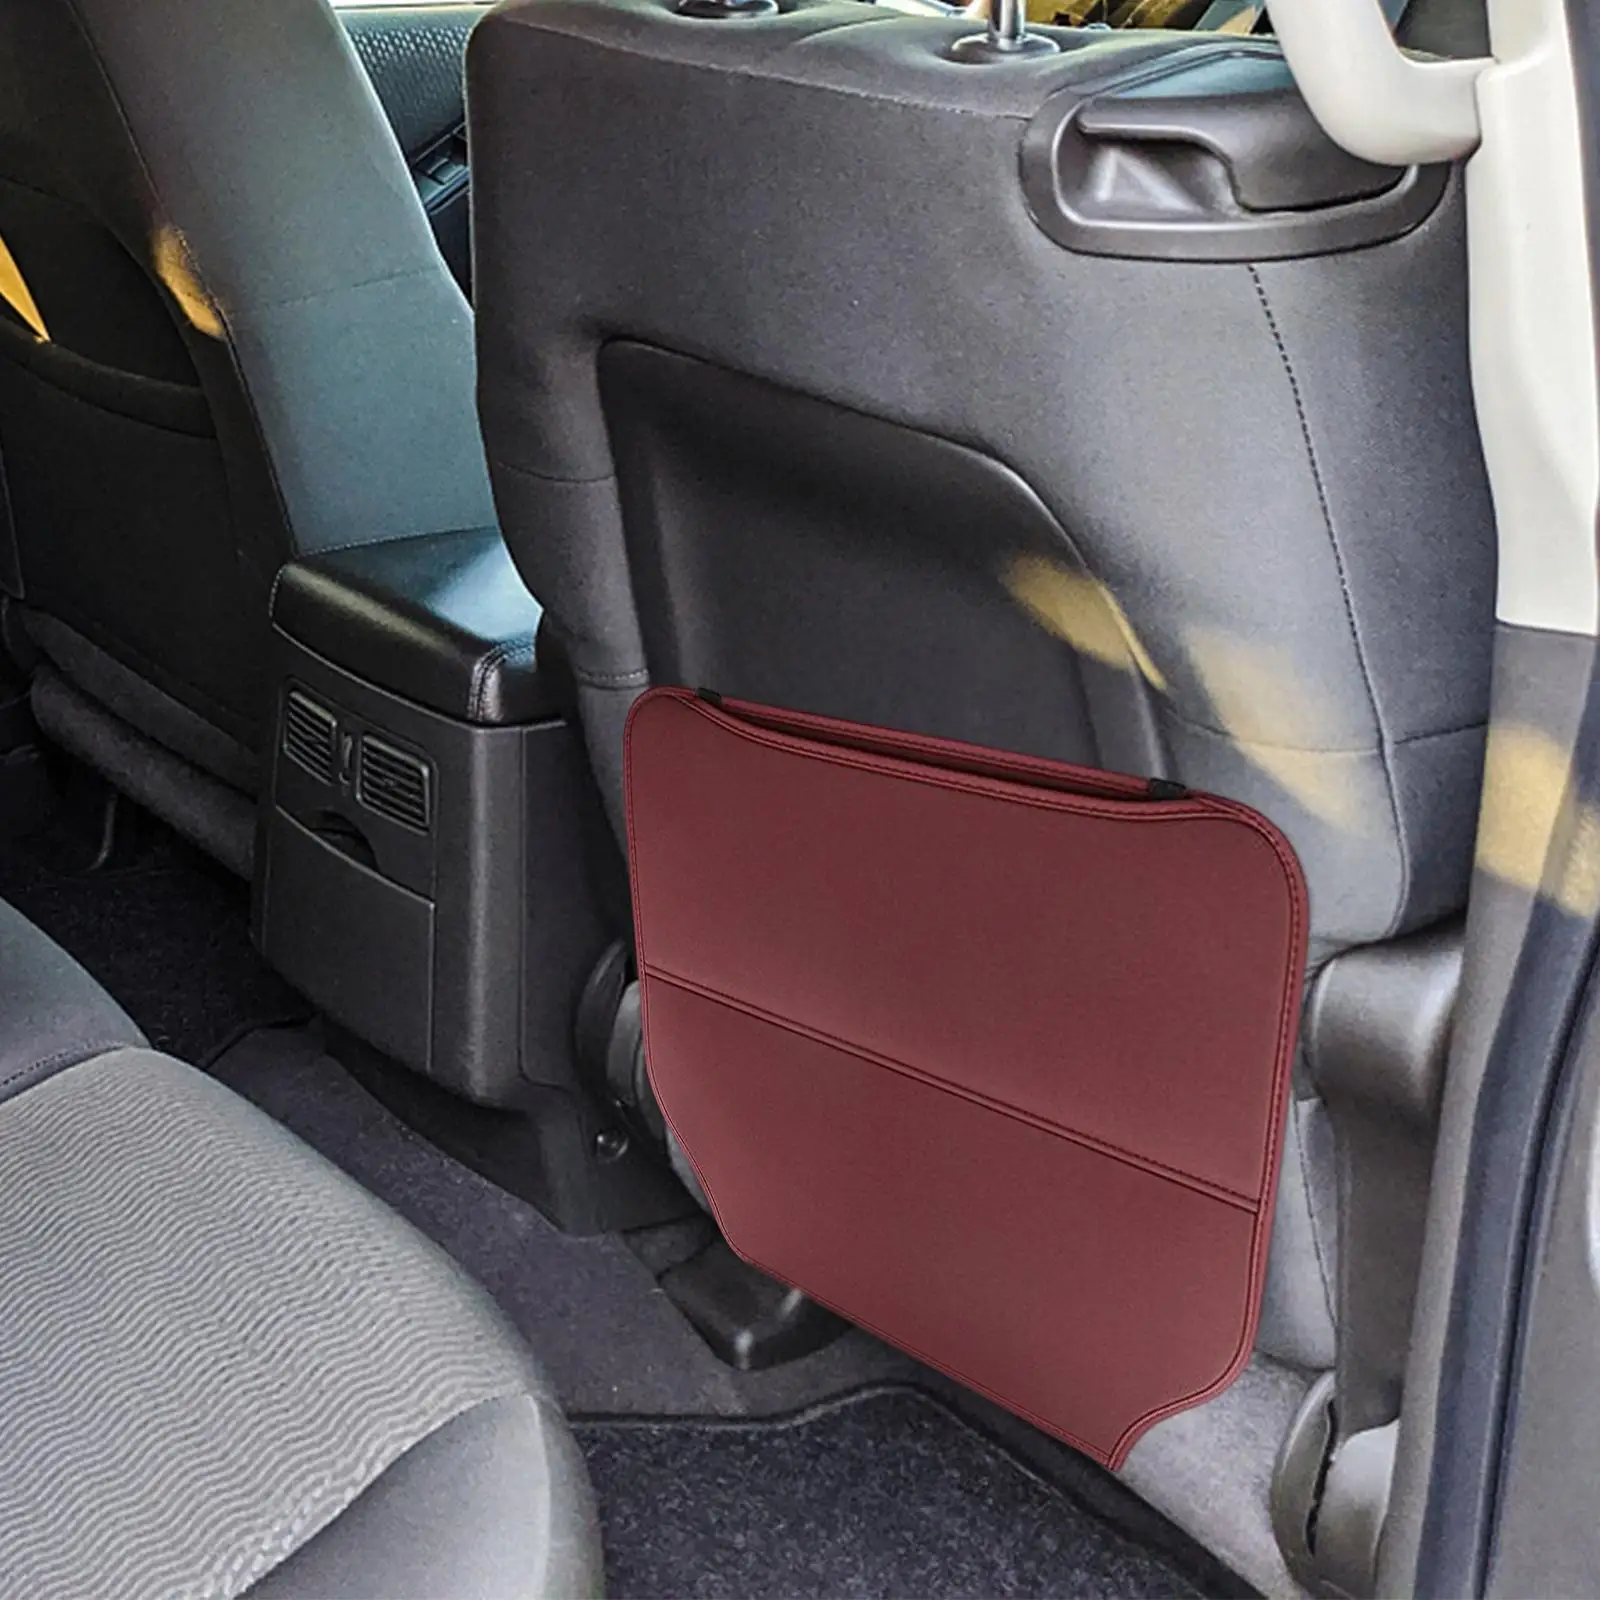 Auto Seat Back Kick Pad with Storage Pocket Replaces Scratch Resistant Seat back mat for Byd Atto 3 Yuan Plus Accessory